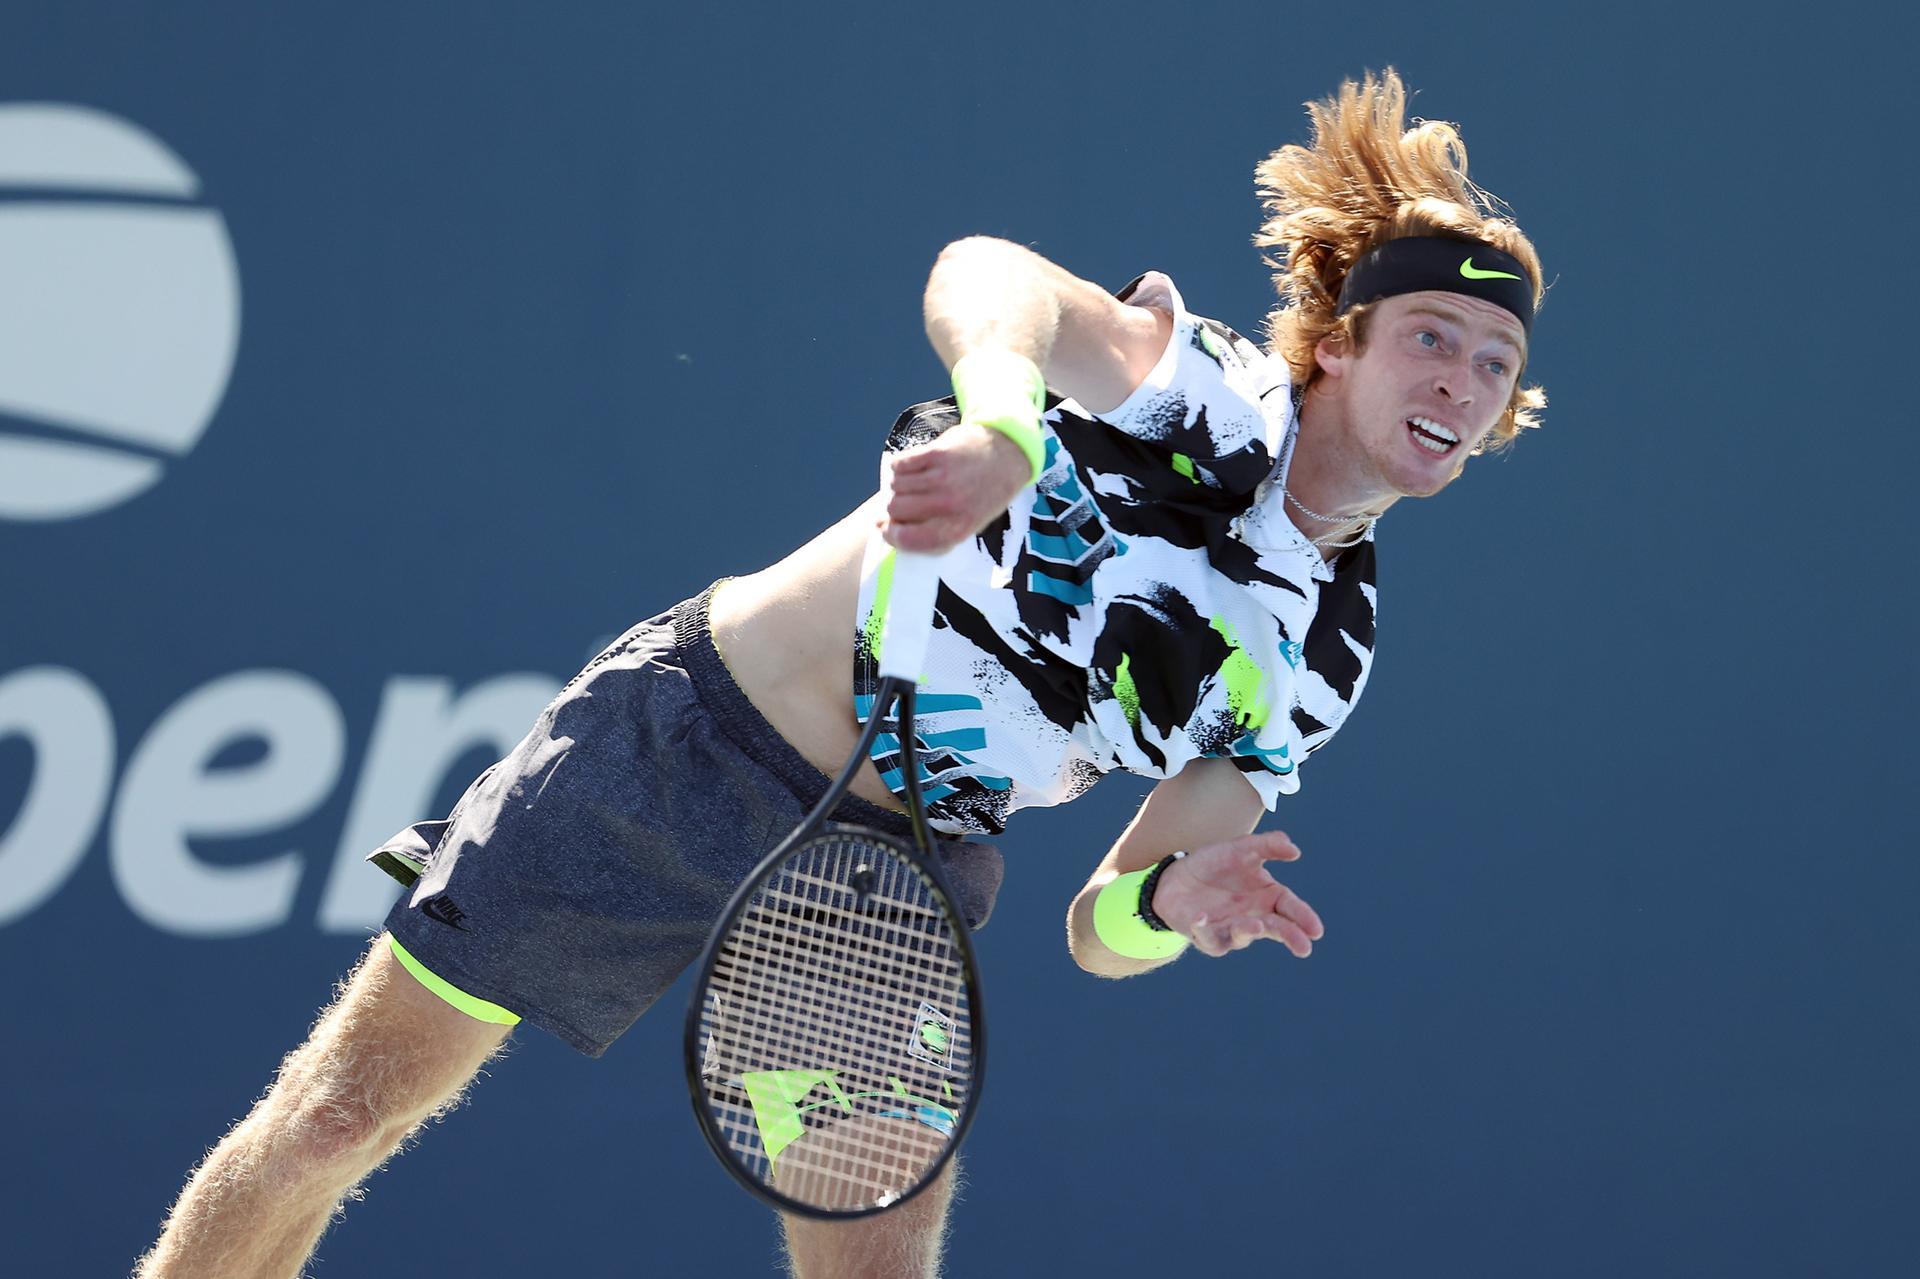 Andrey Rublev Music-loving tennis star making his game sing at the US Open